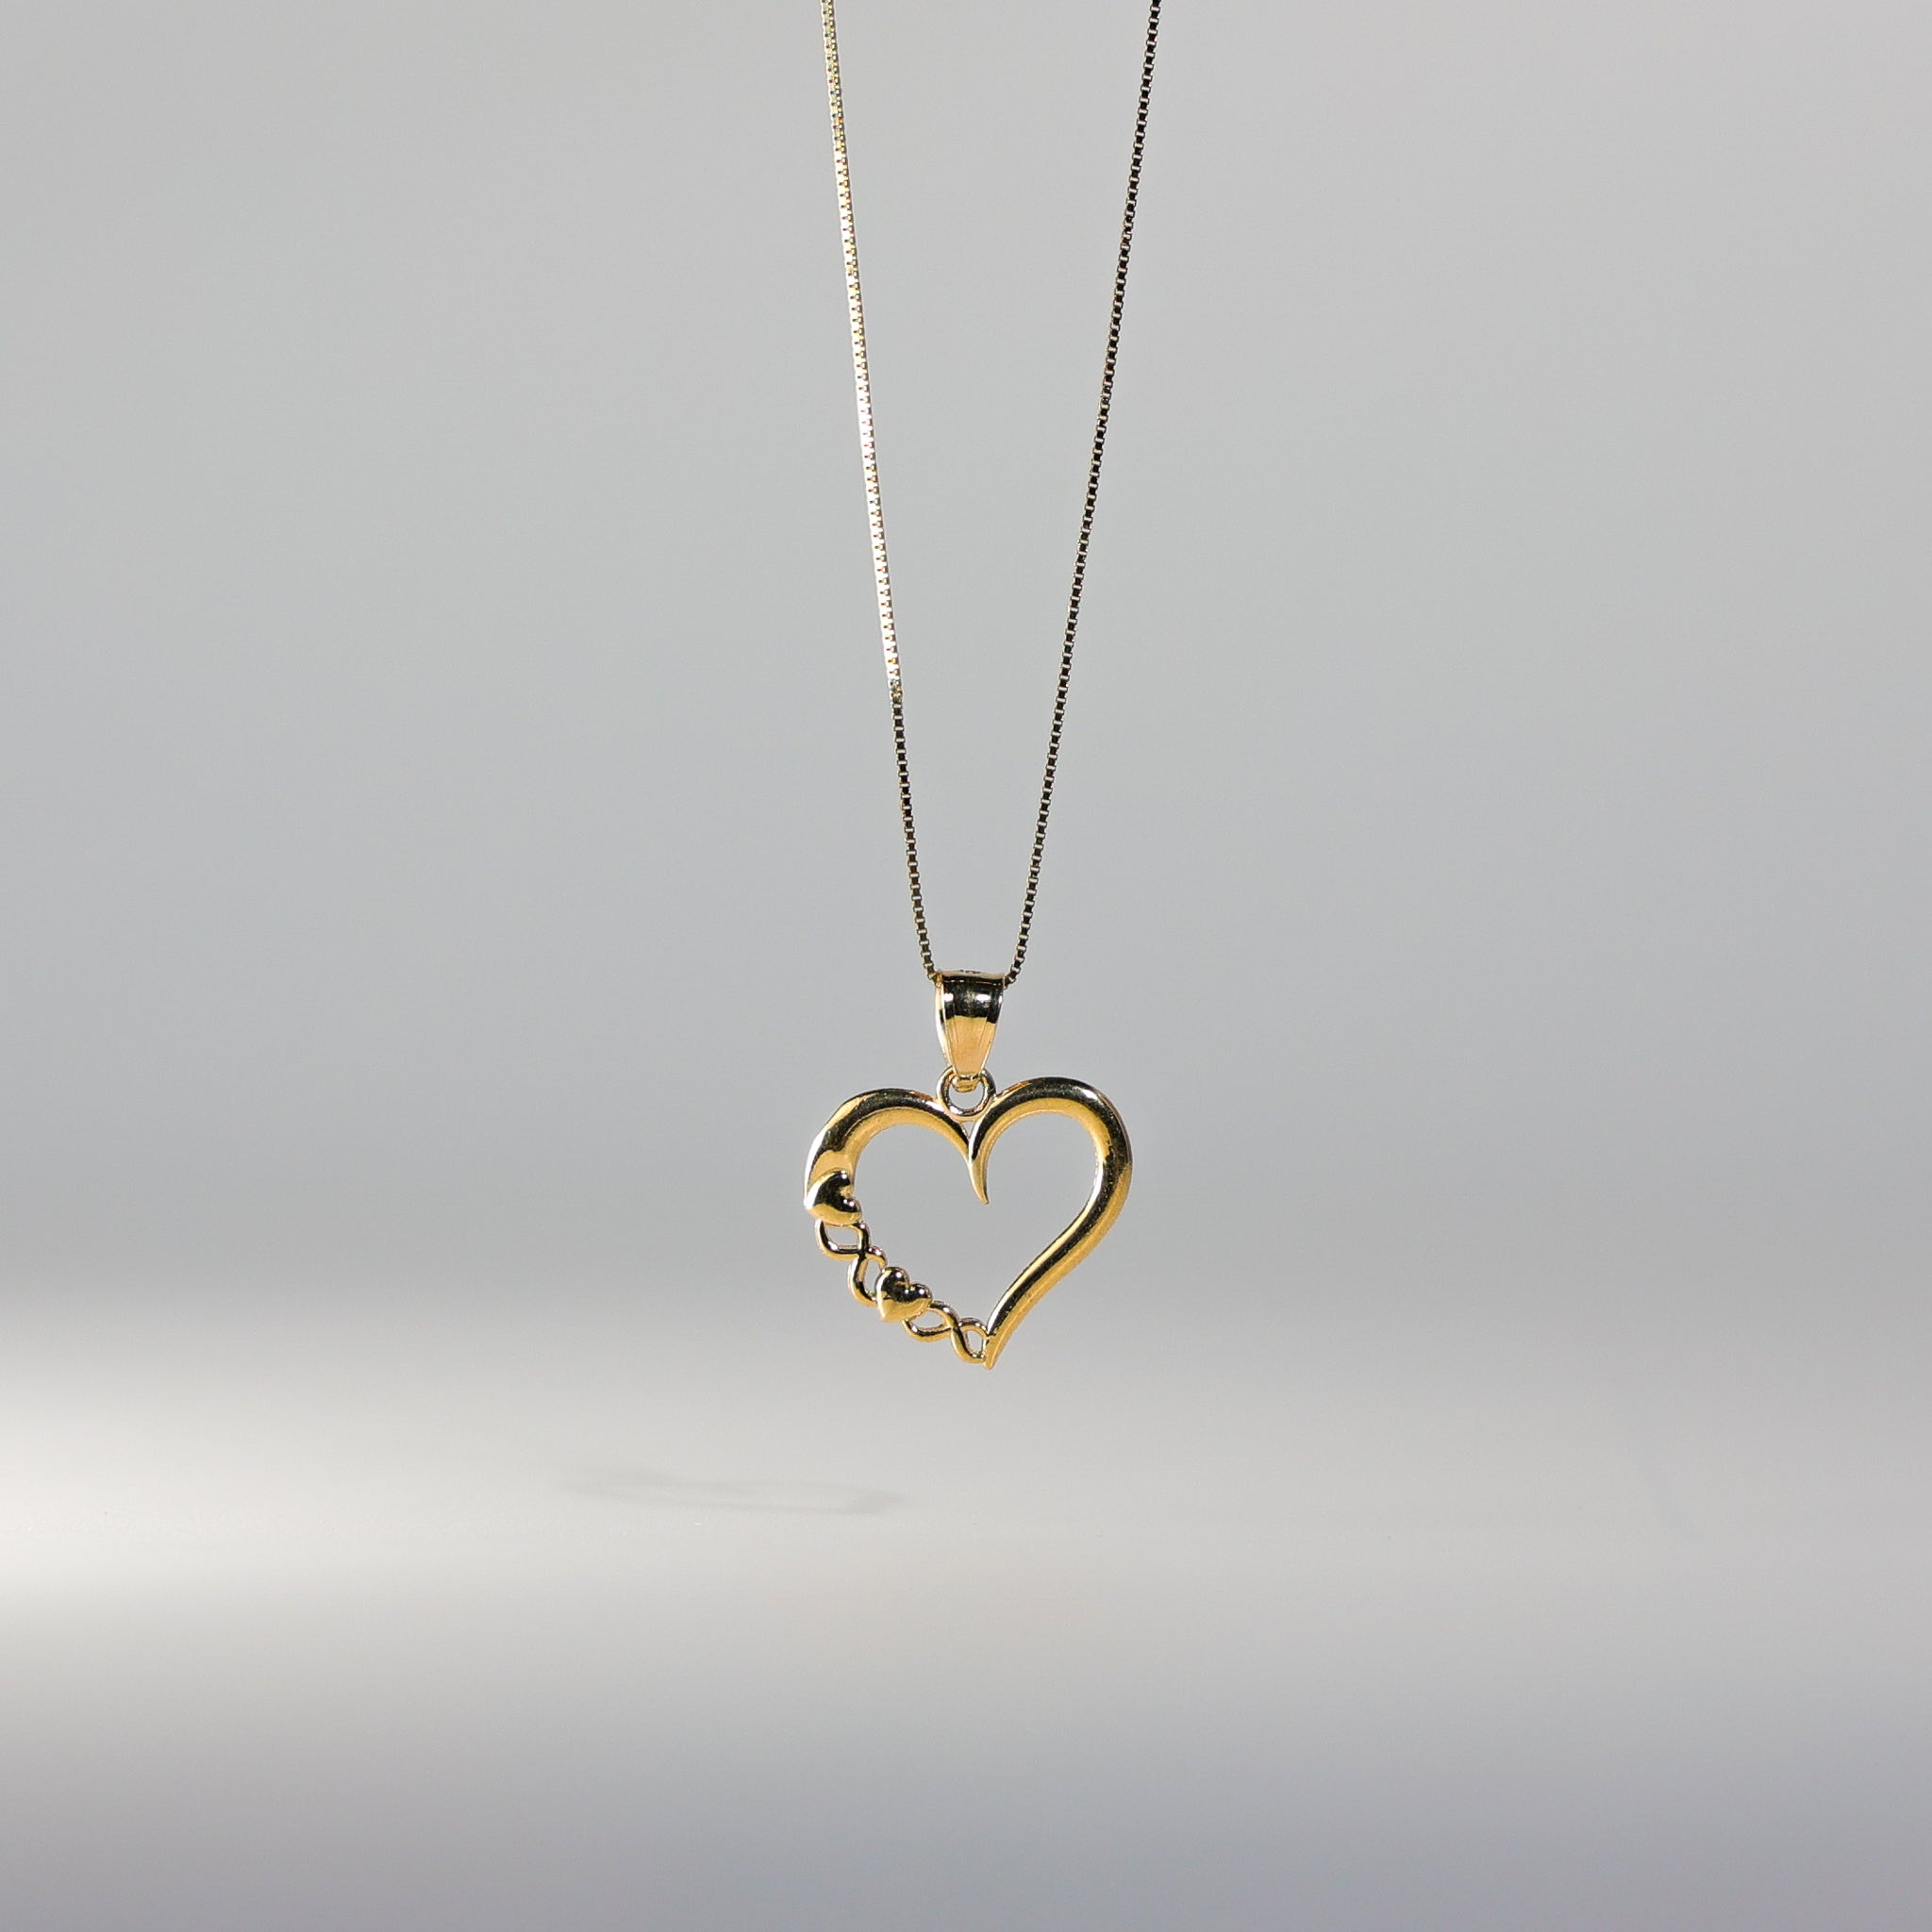 Gold Dainty Heart Pendant Model-1790 - Charlie & Co. Jewelry